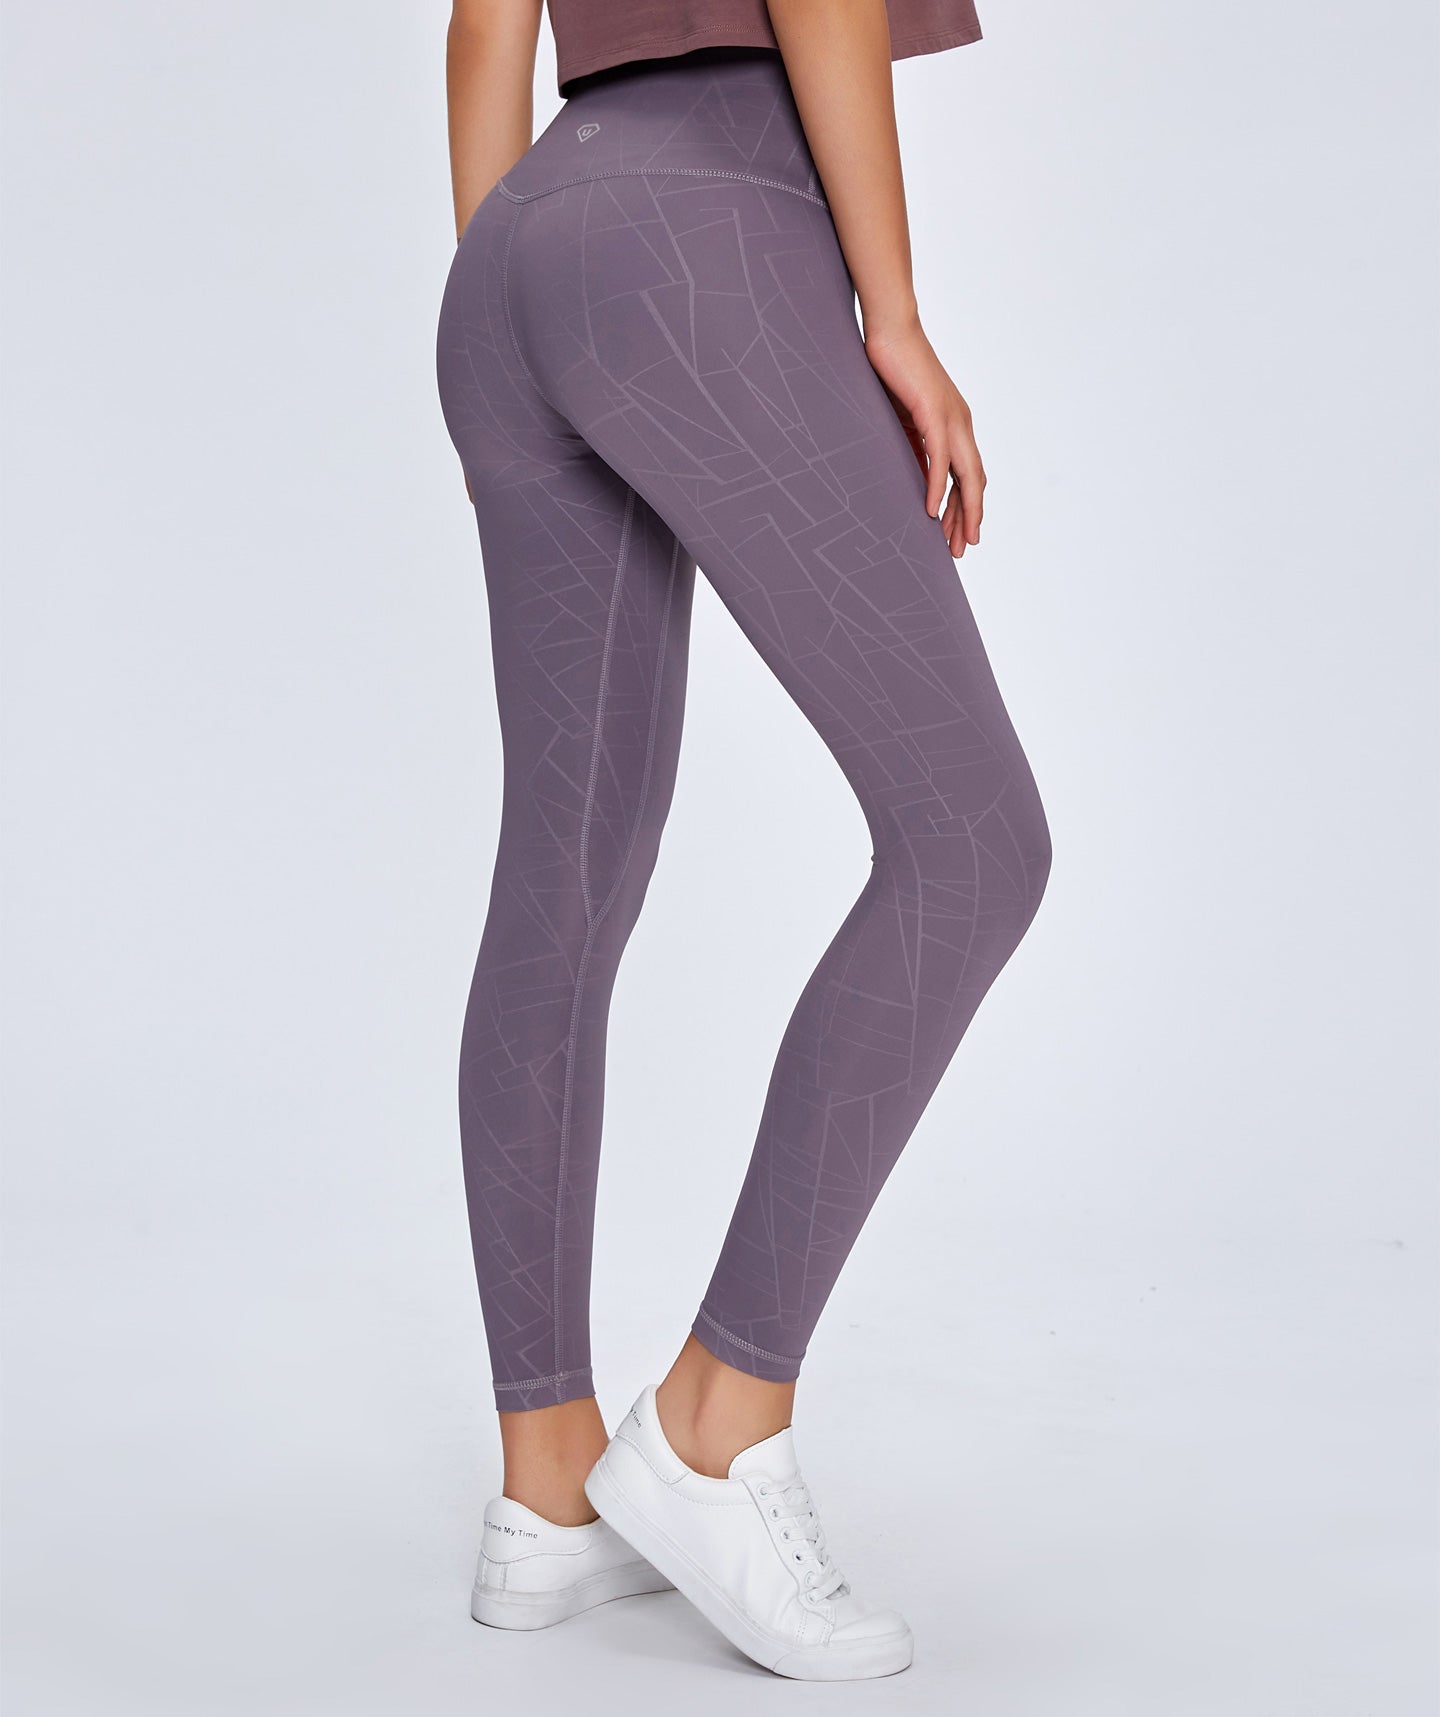 Energy Leggings with Geometric Silver Lines Print in Lavender